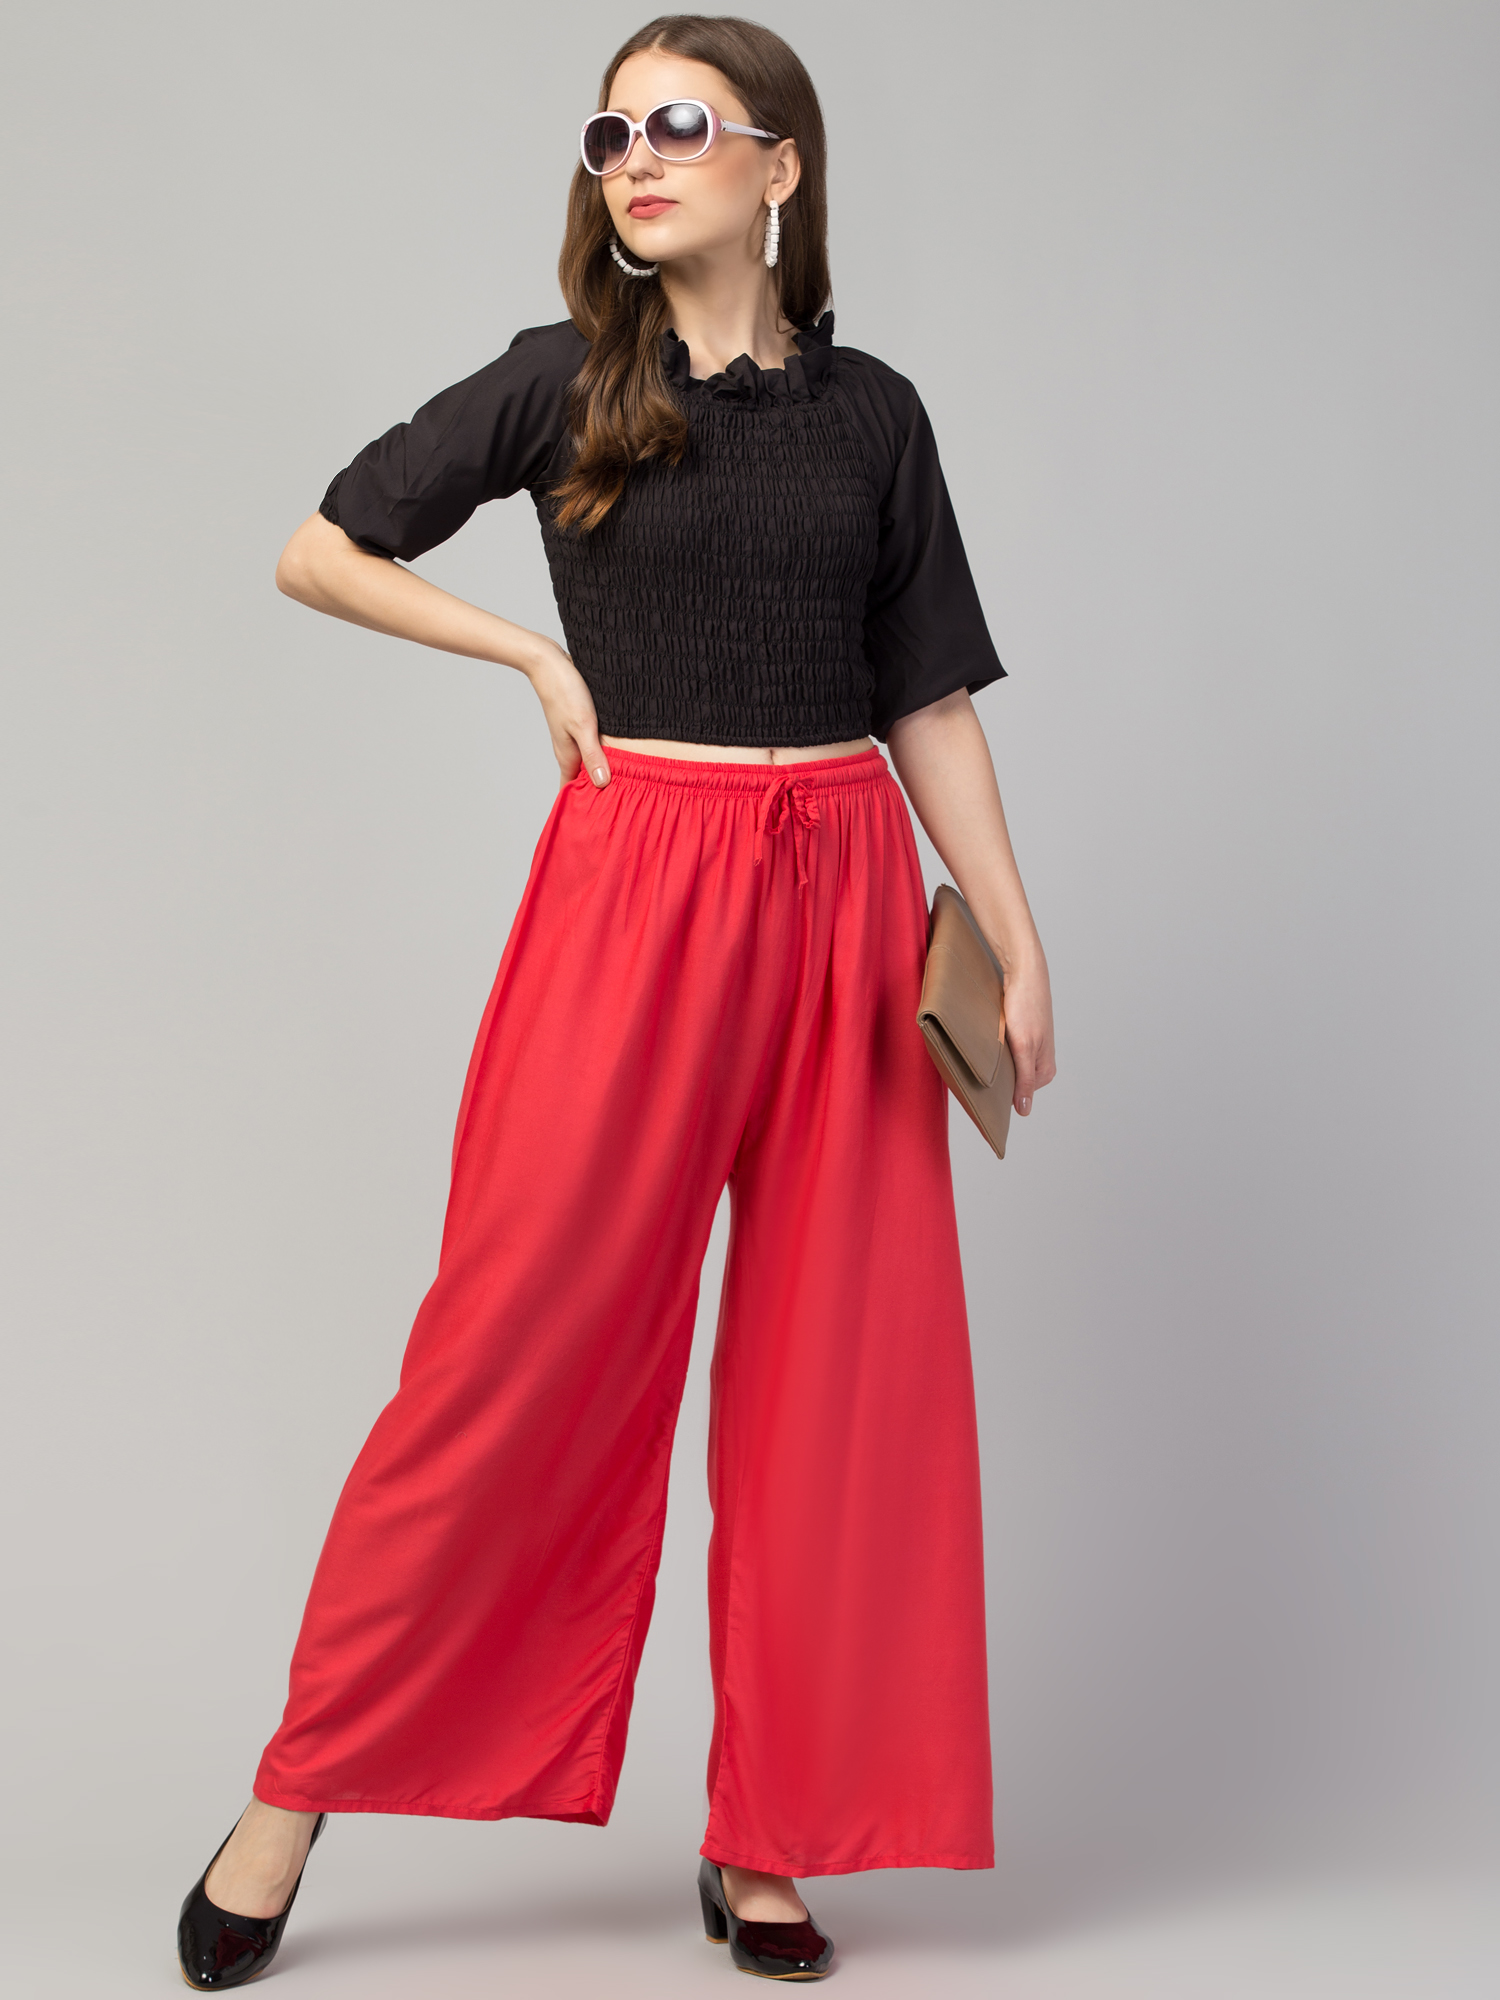 Red Satin Pants – Lobo's Boutique Tally